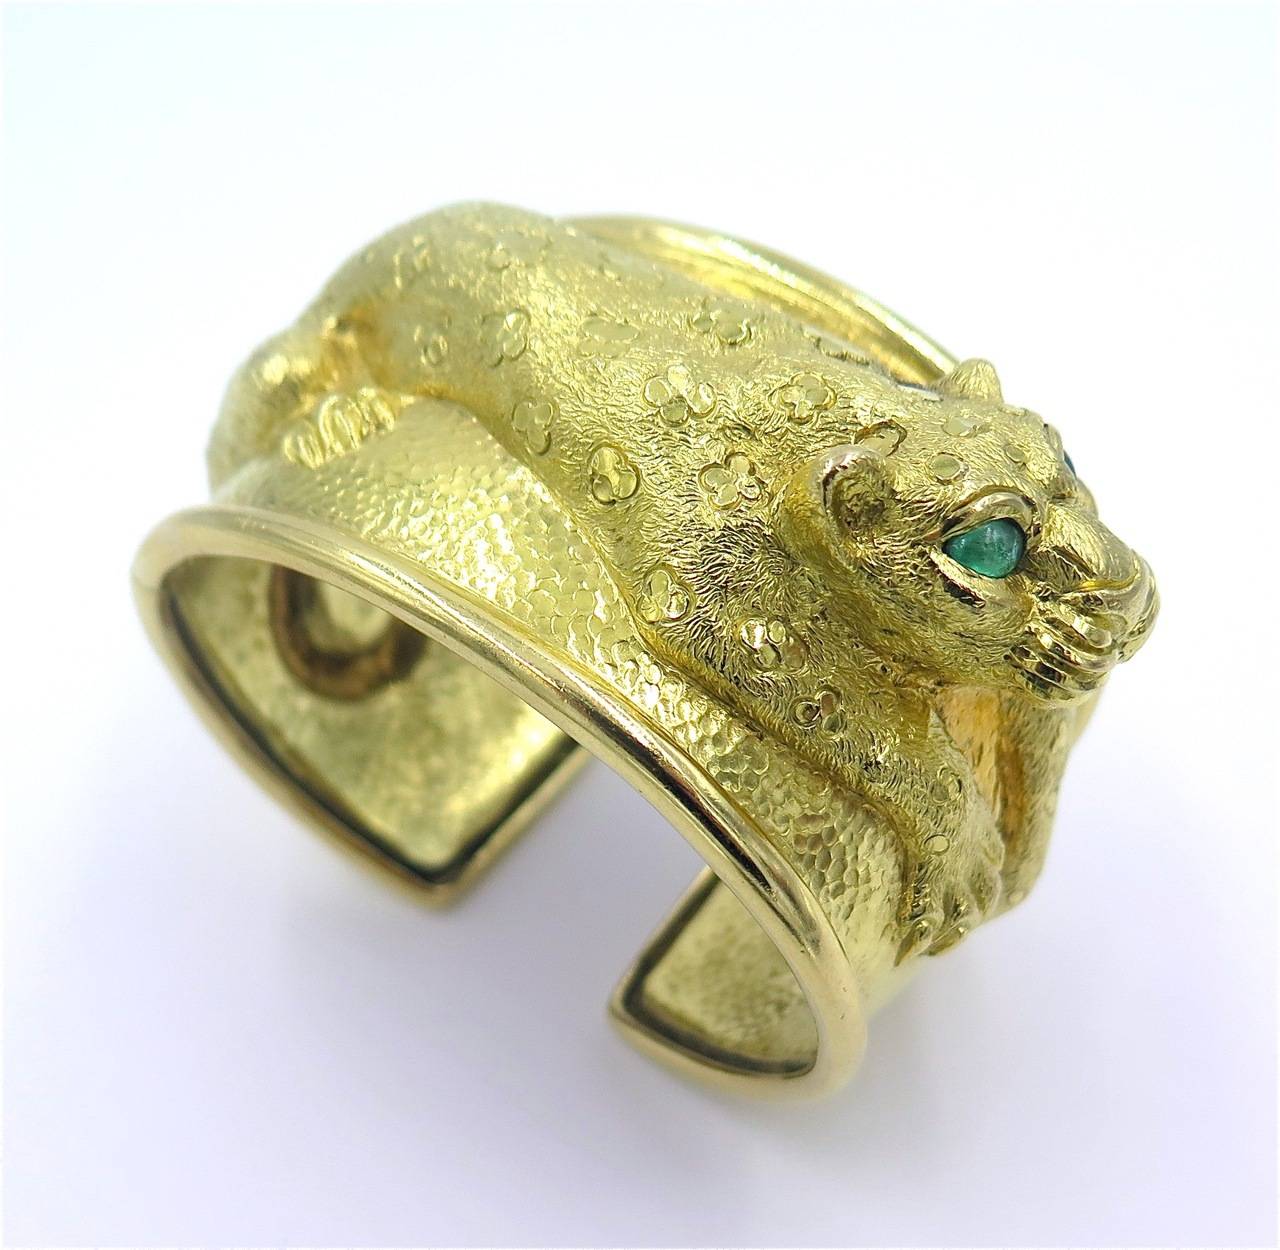 An 18 karat yellow gold and emerald “Leopard” cuff bracelet, David Webb, Circa 1980.  Signed WEBB 18K.  The wide textured gold cuff depicts a crouching leopard, the eyes set with pear-shaped emeralds weighing approximately .75 carat total.  The